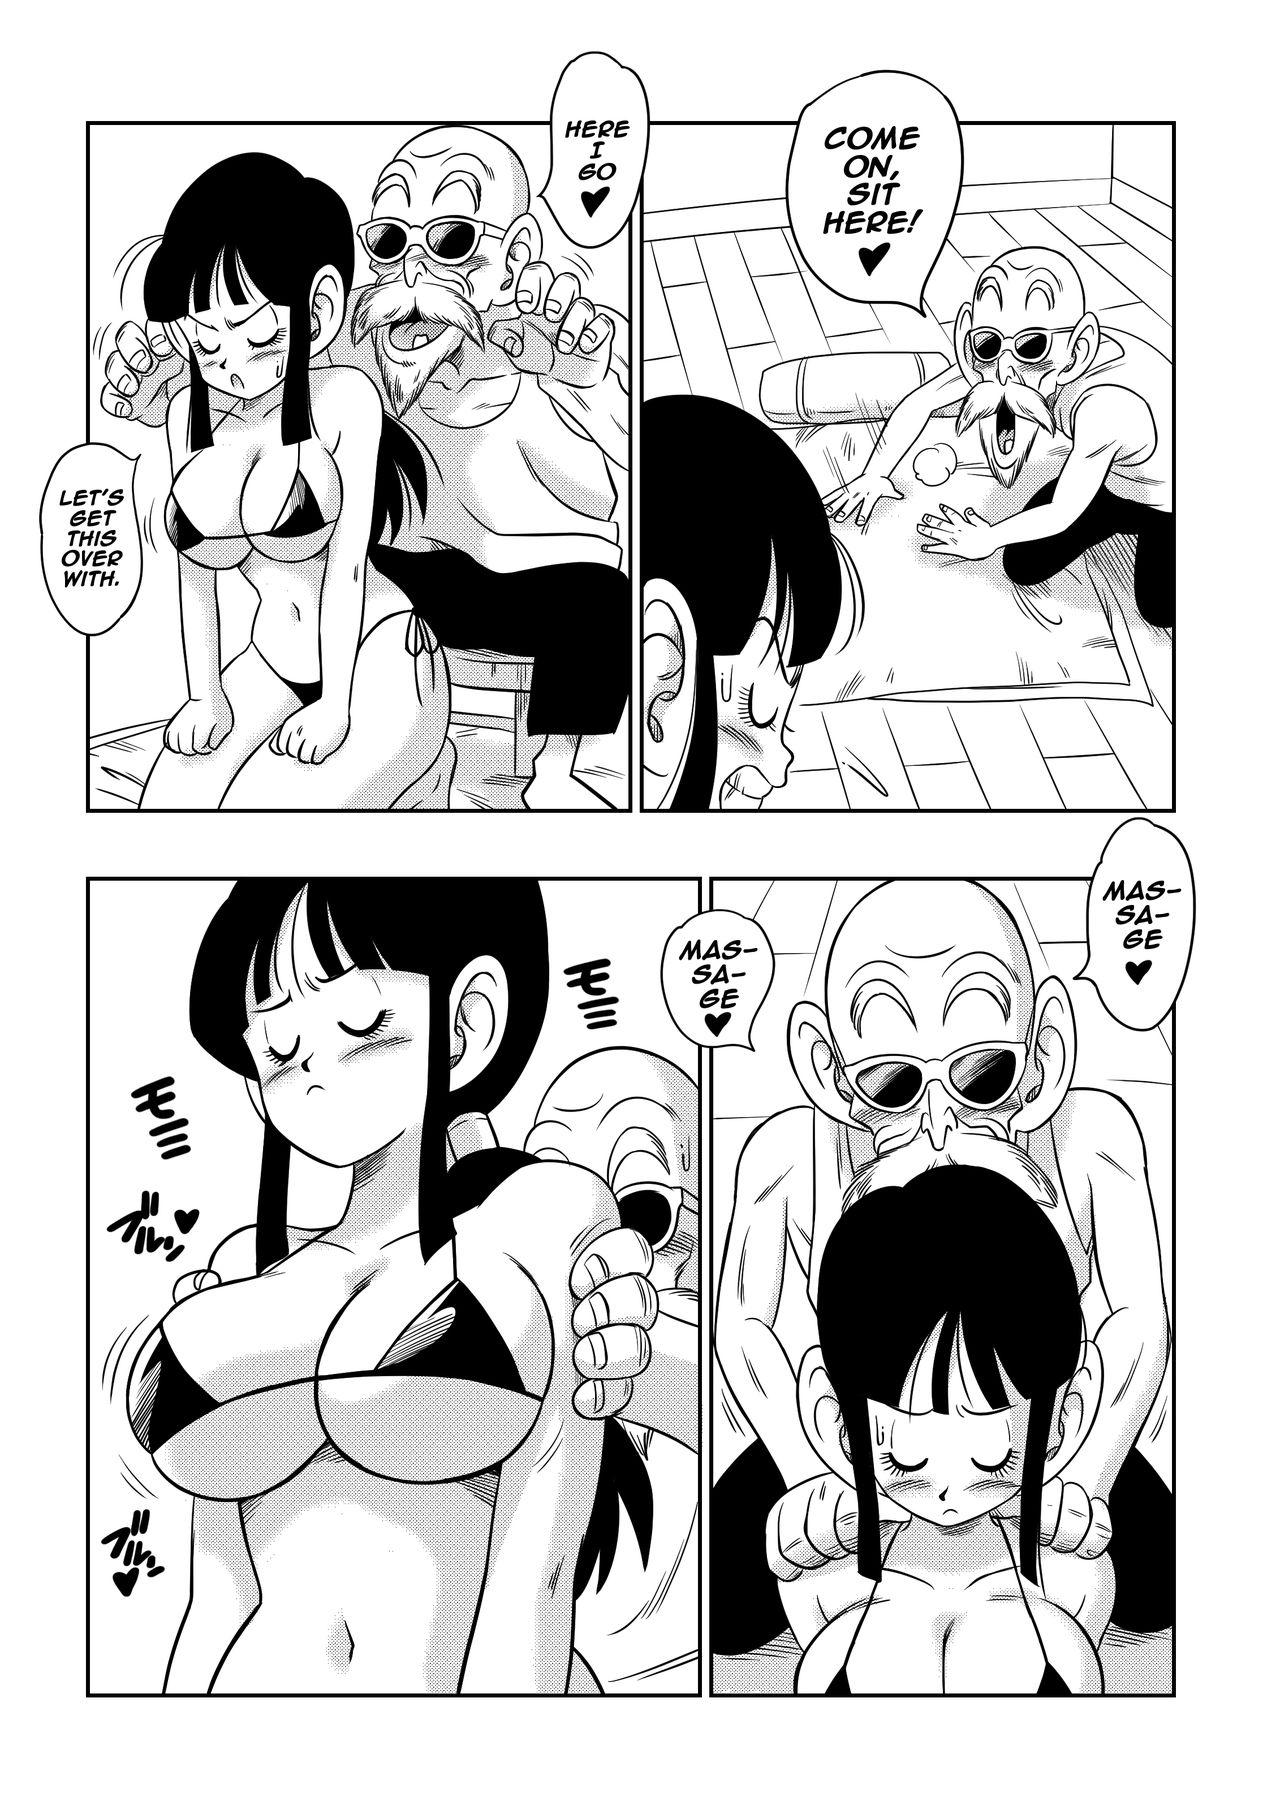 Coroa "An Ancient Tradition" - Young Wife is Harassed! - Dragon ball z Hardcore Gay - Page 8